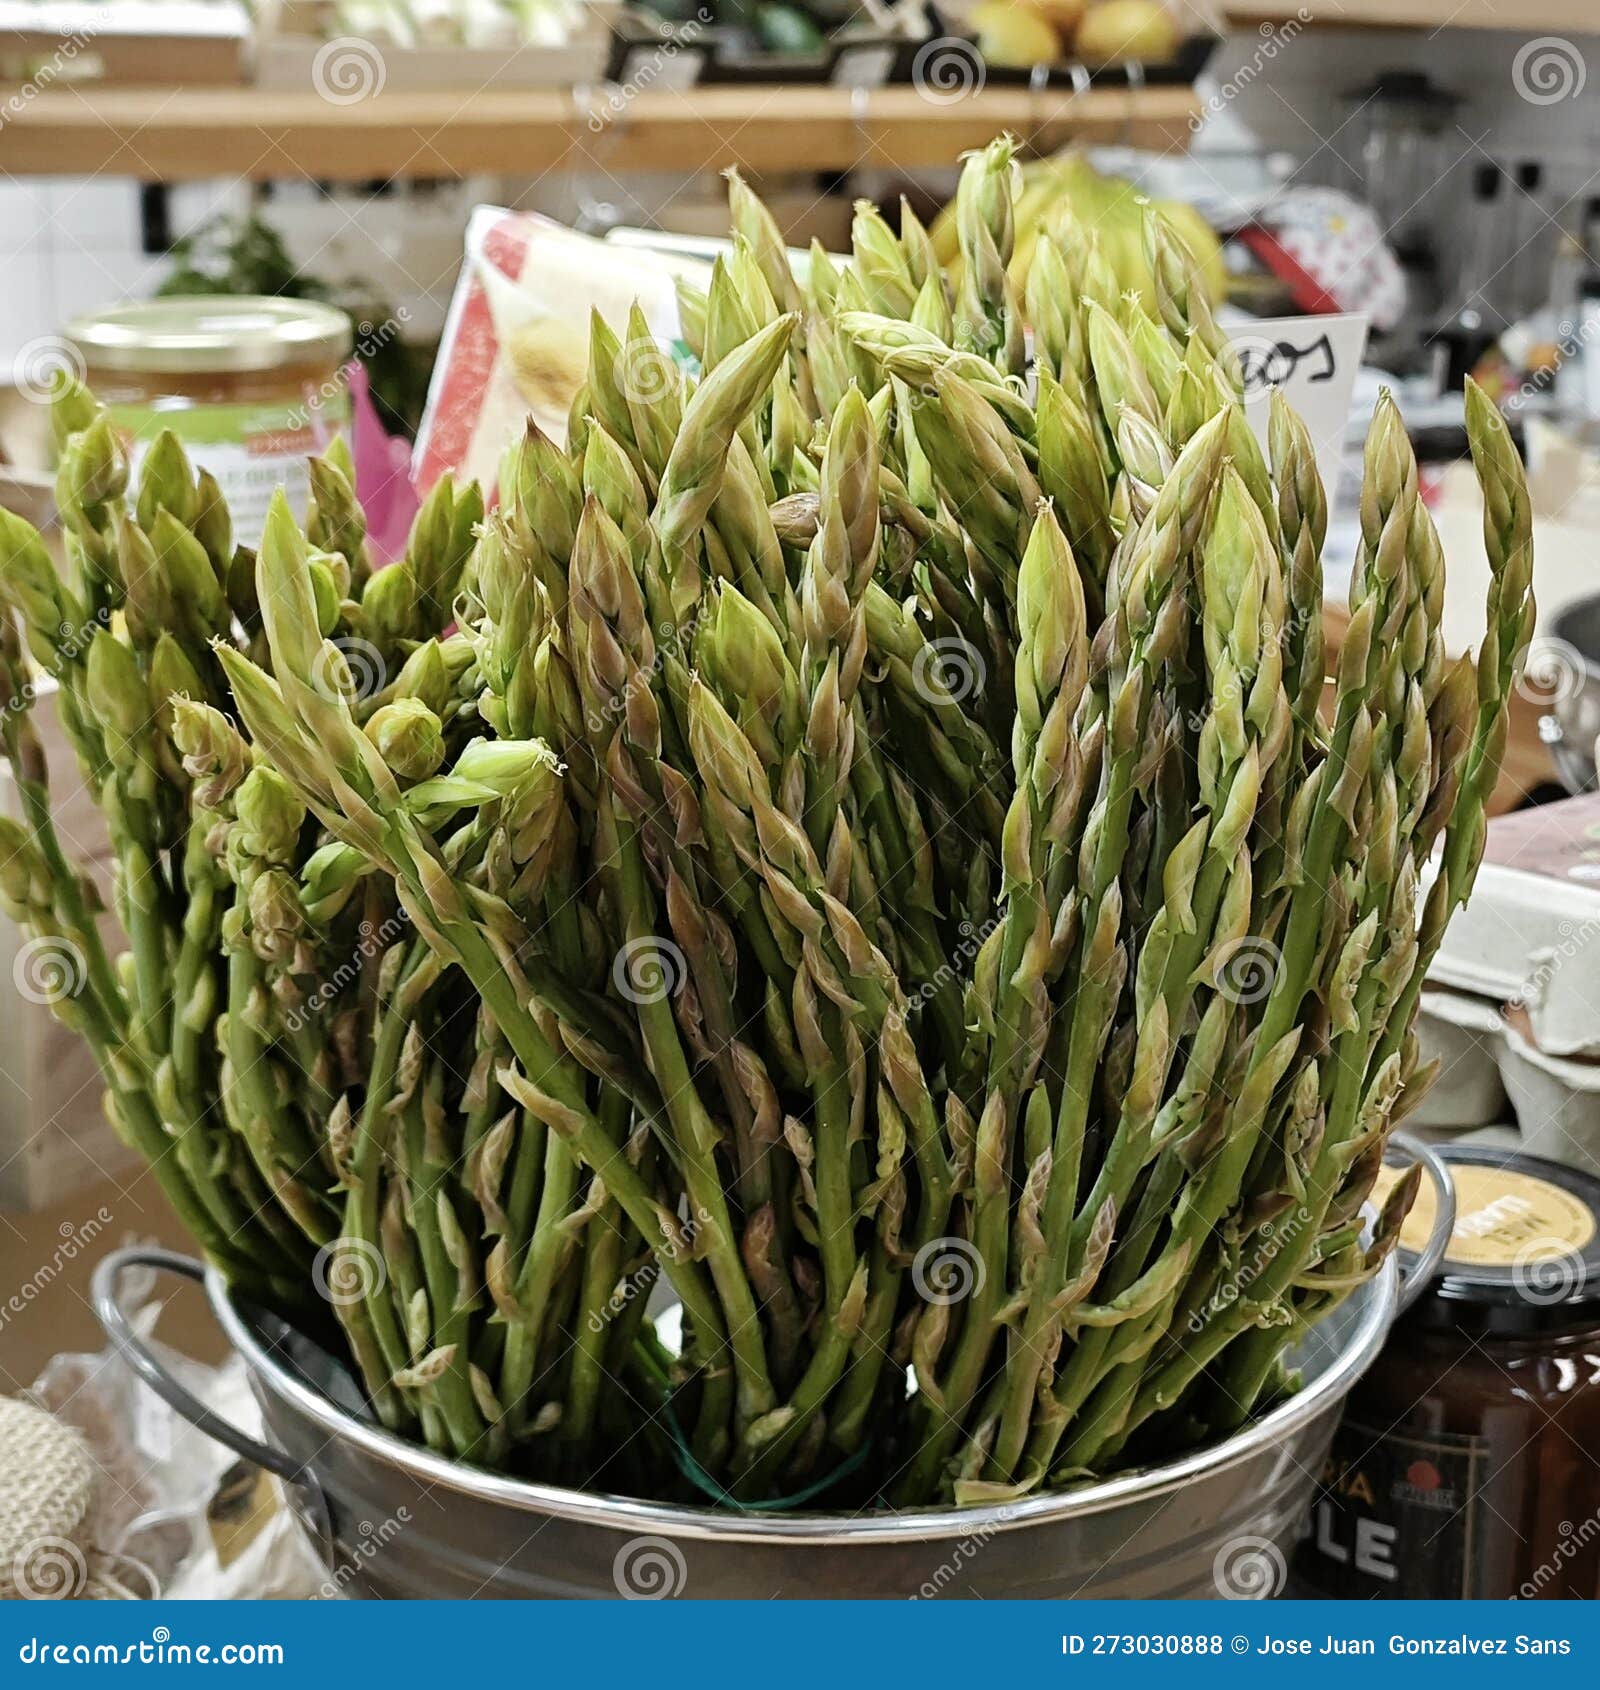 bunch of wild asparagus in a market store